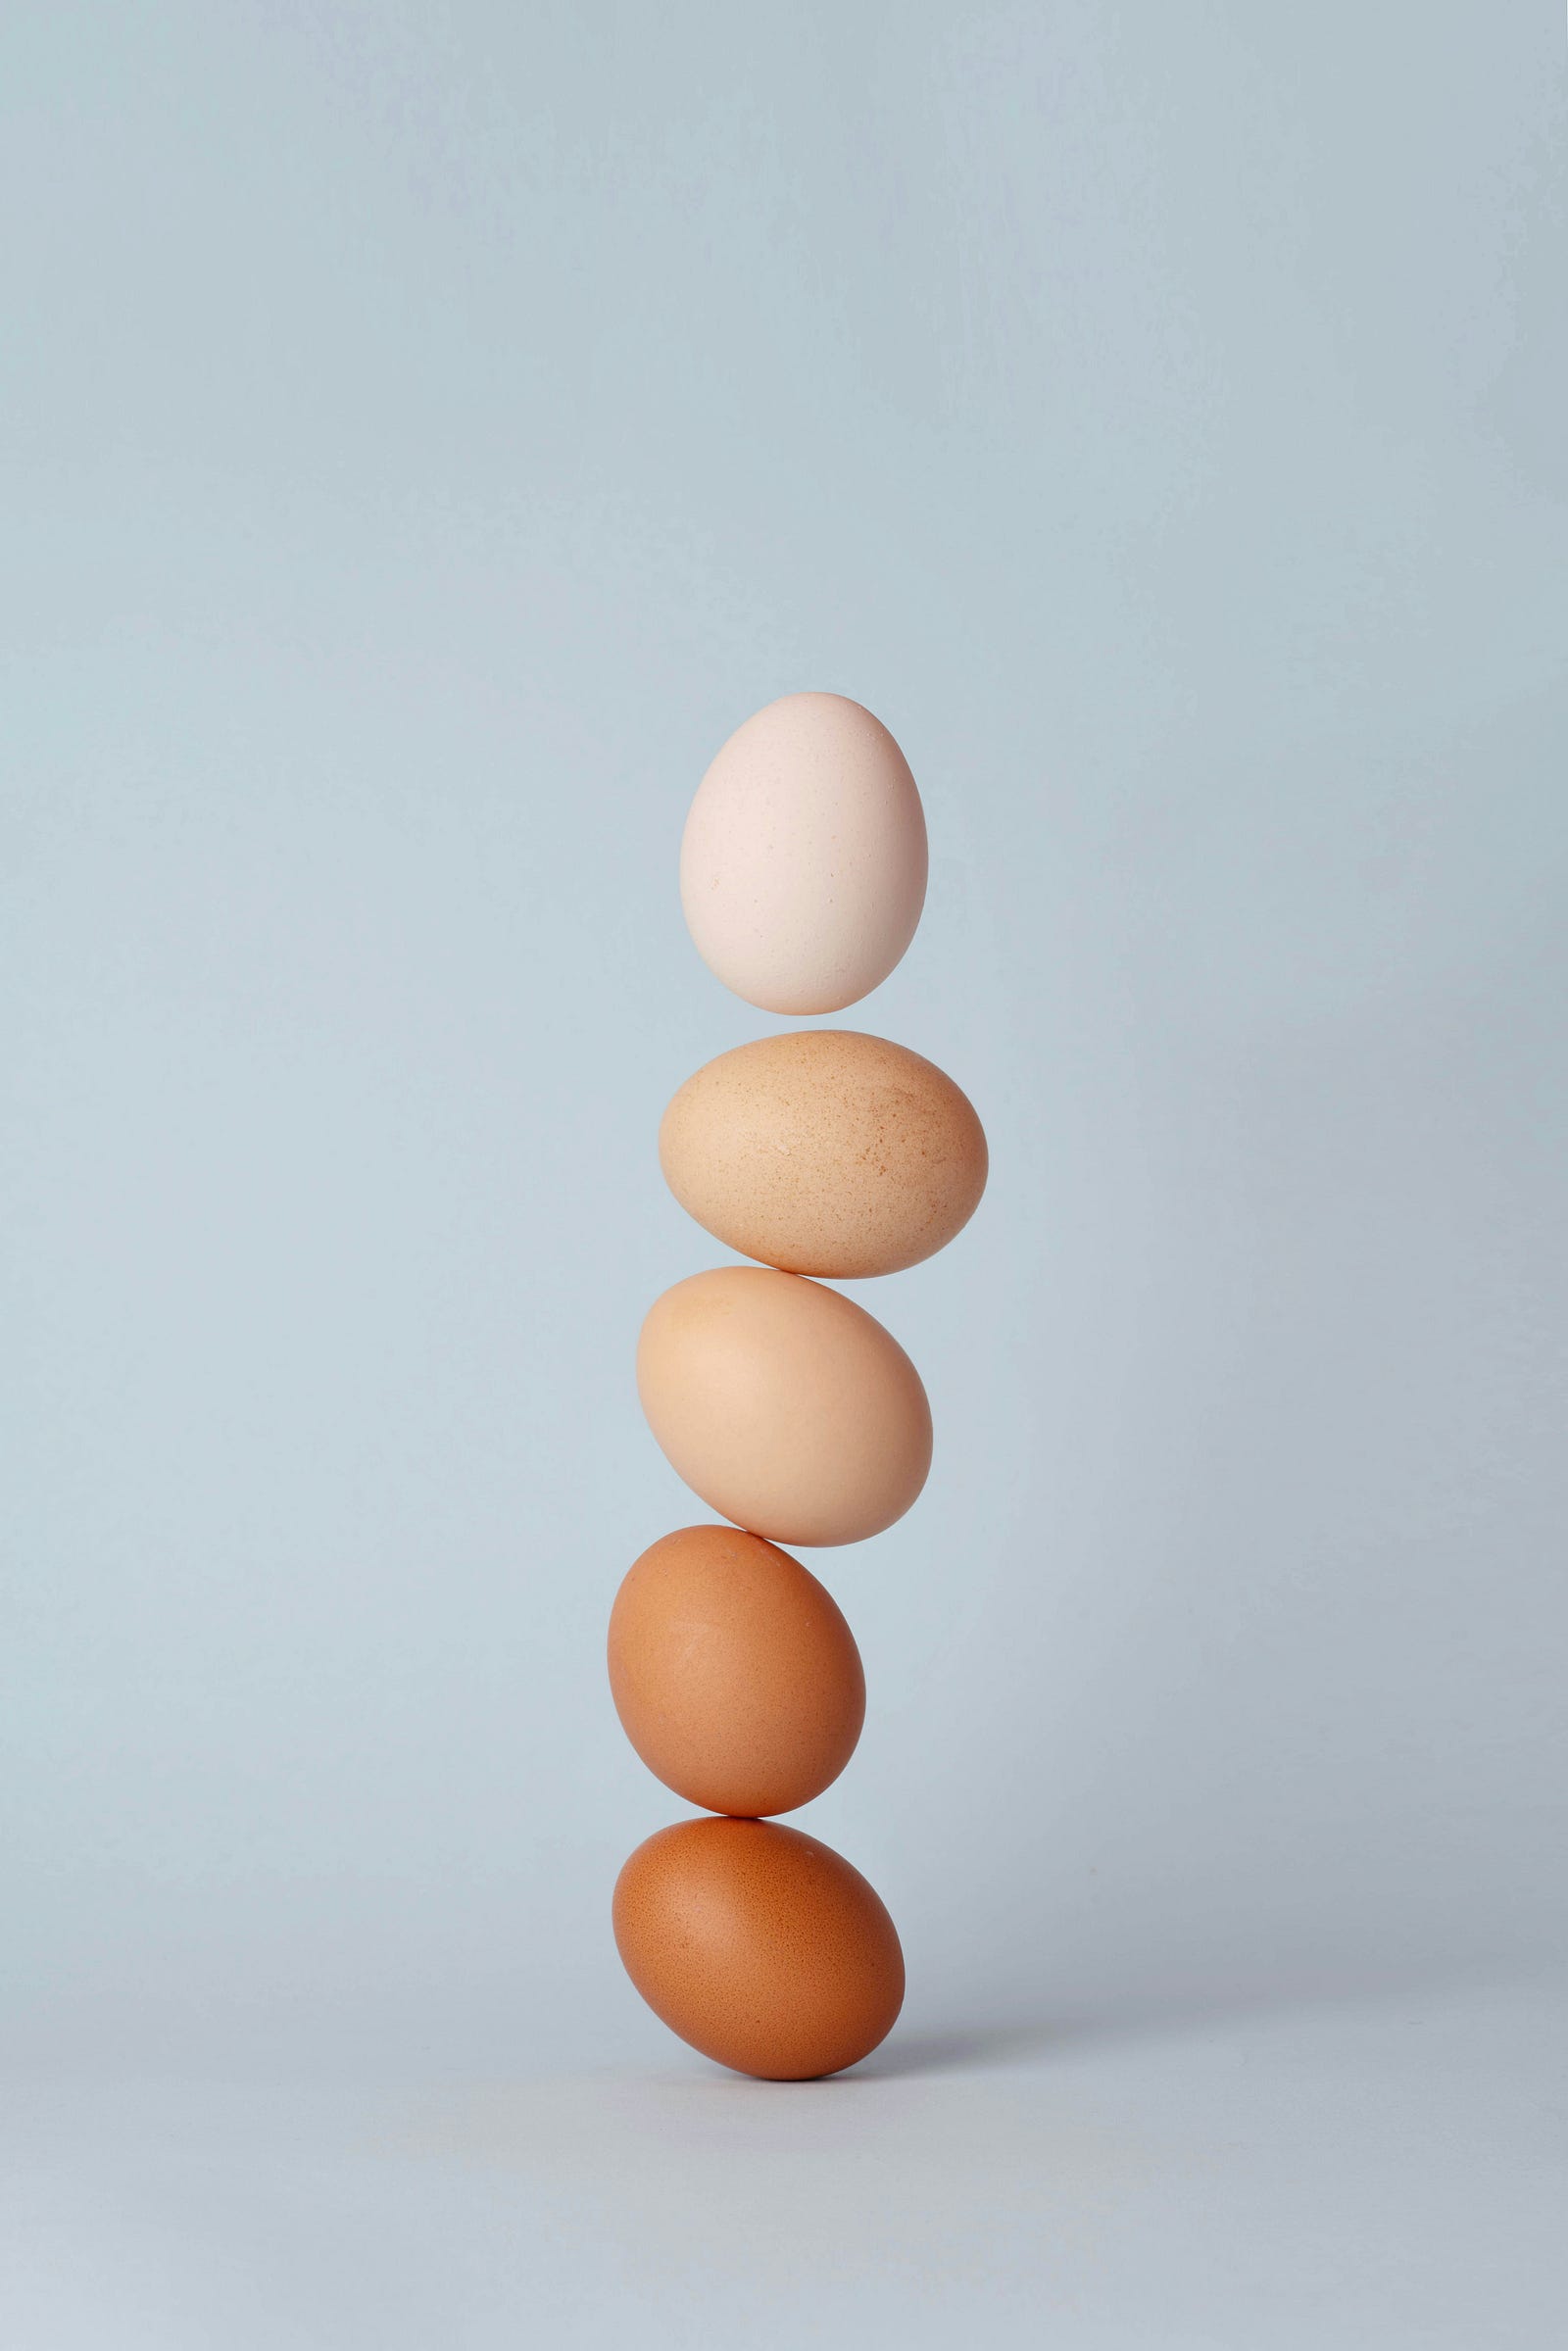 Five various-colored eggs — rich protein sources — balance on one another in a verticle line.